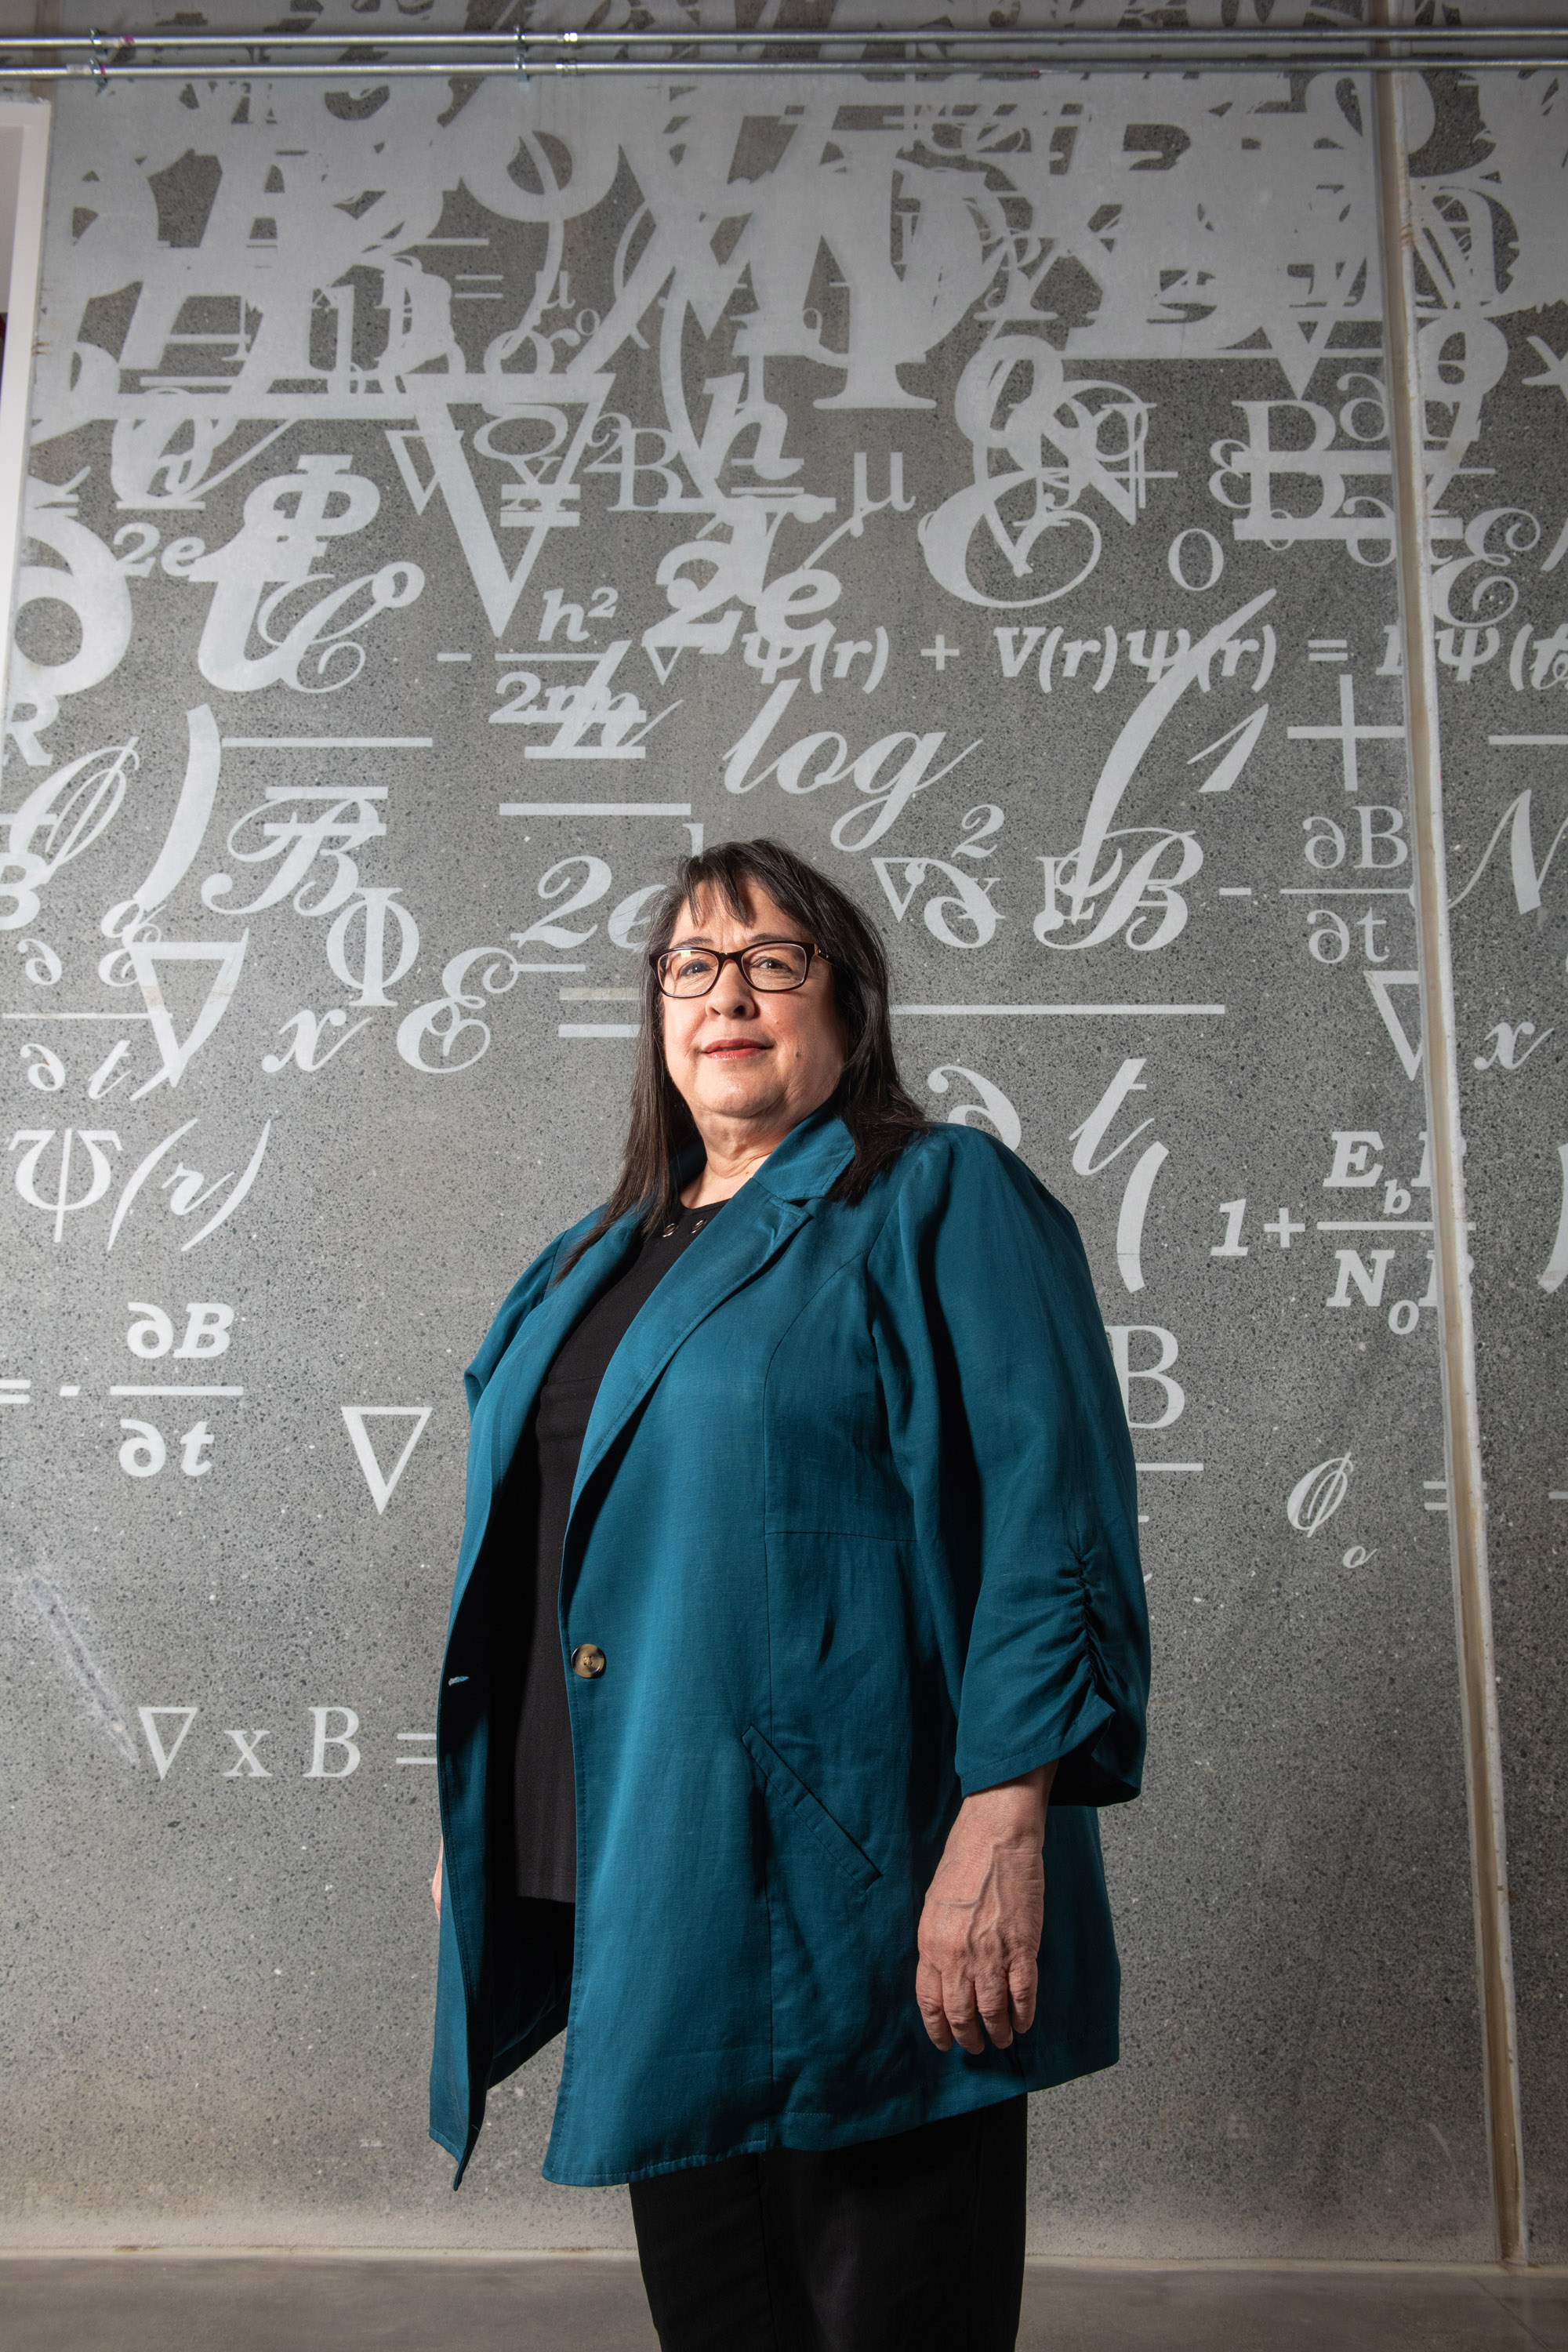 Maricela Lizcano stands inside NASA Glenn Research Center’s Aerospace Communications Facility. She is wearing a teal jacket and behind her there are mathematical equations on the wall.